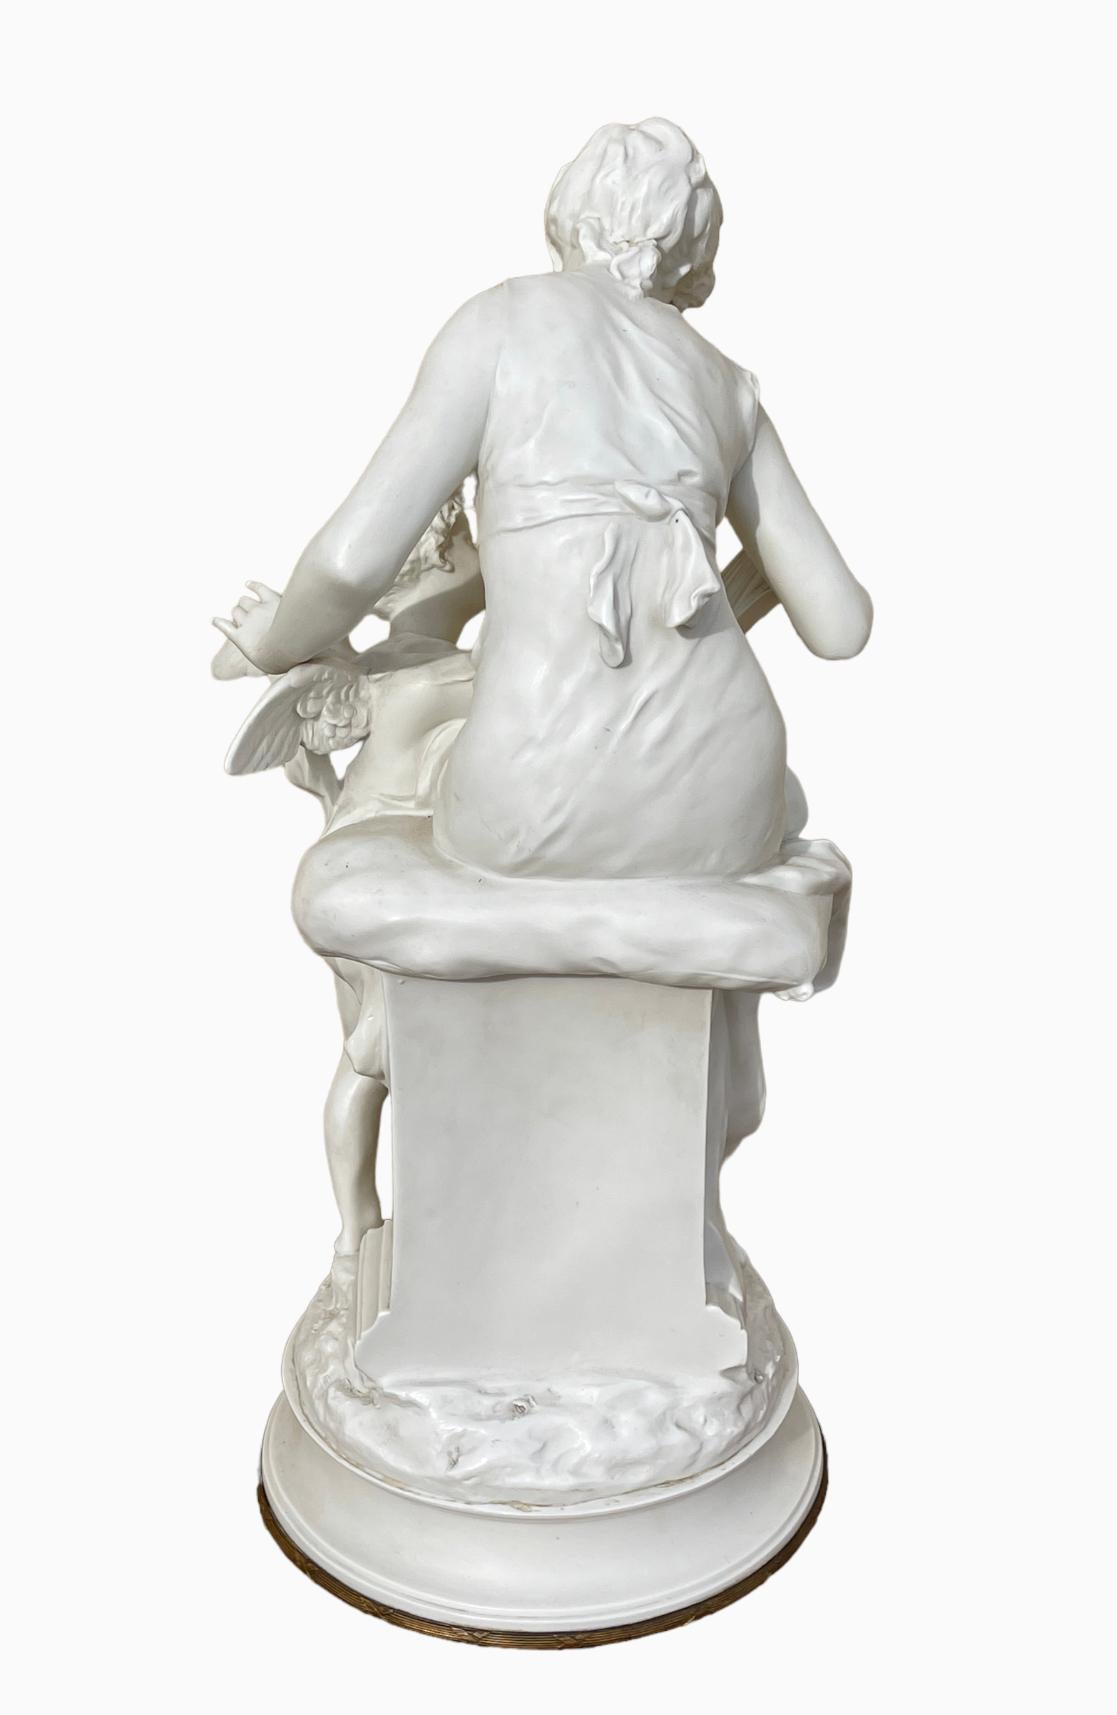 Porcelain Mathurin MOREAU & SÈVRES - Biscuit, Young Woman and Putti For Sale